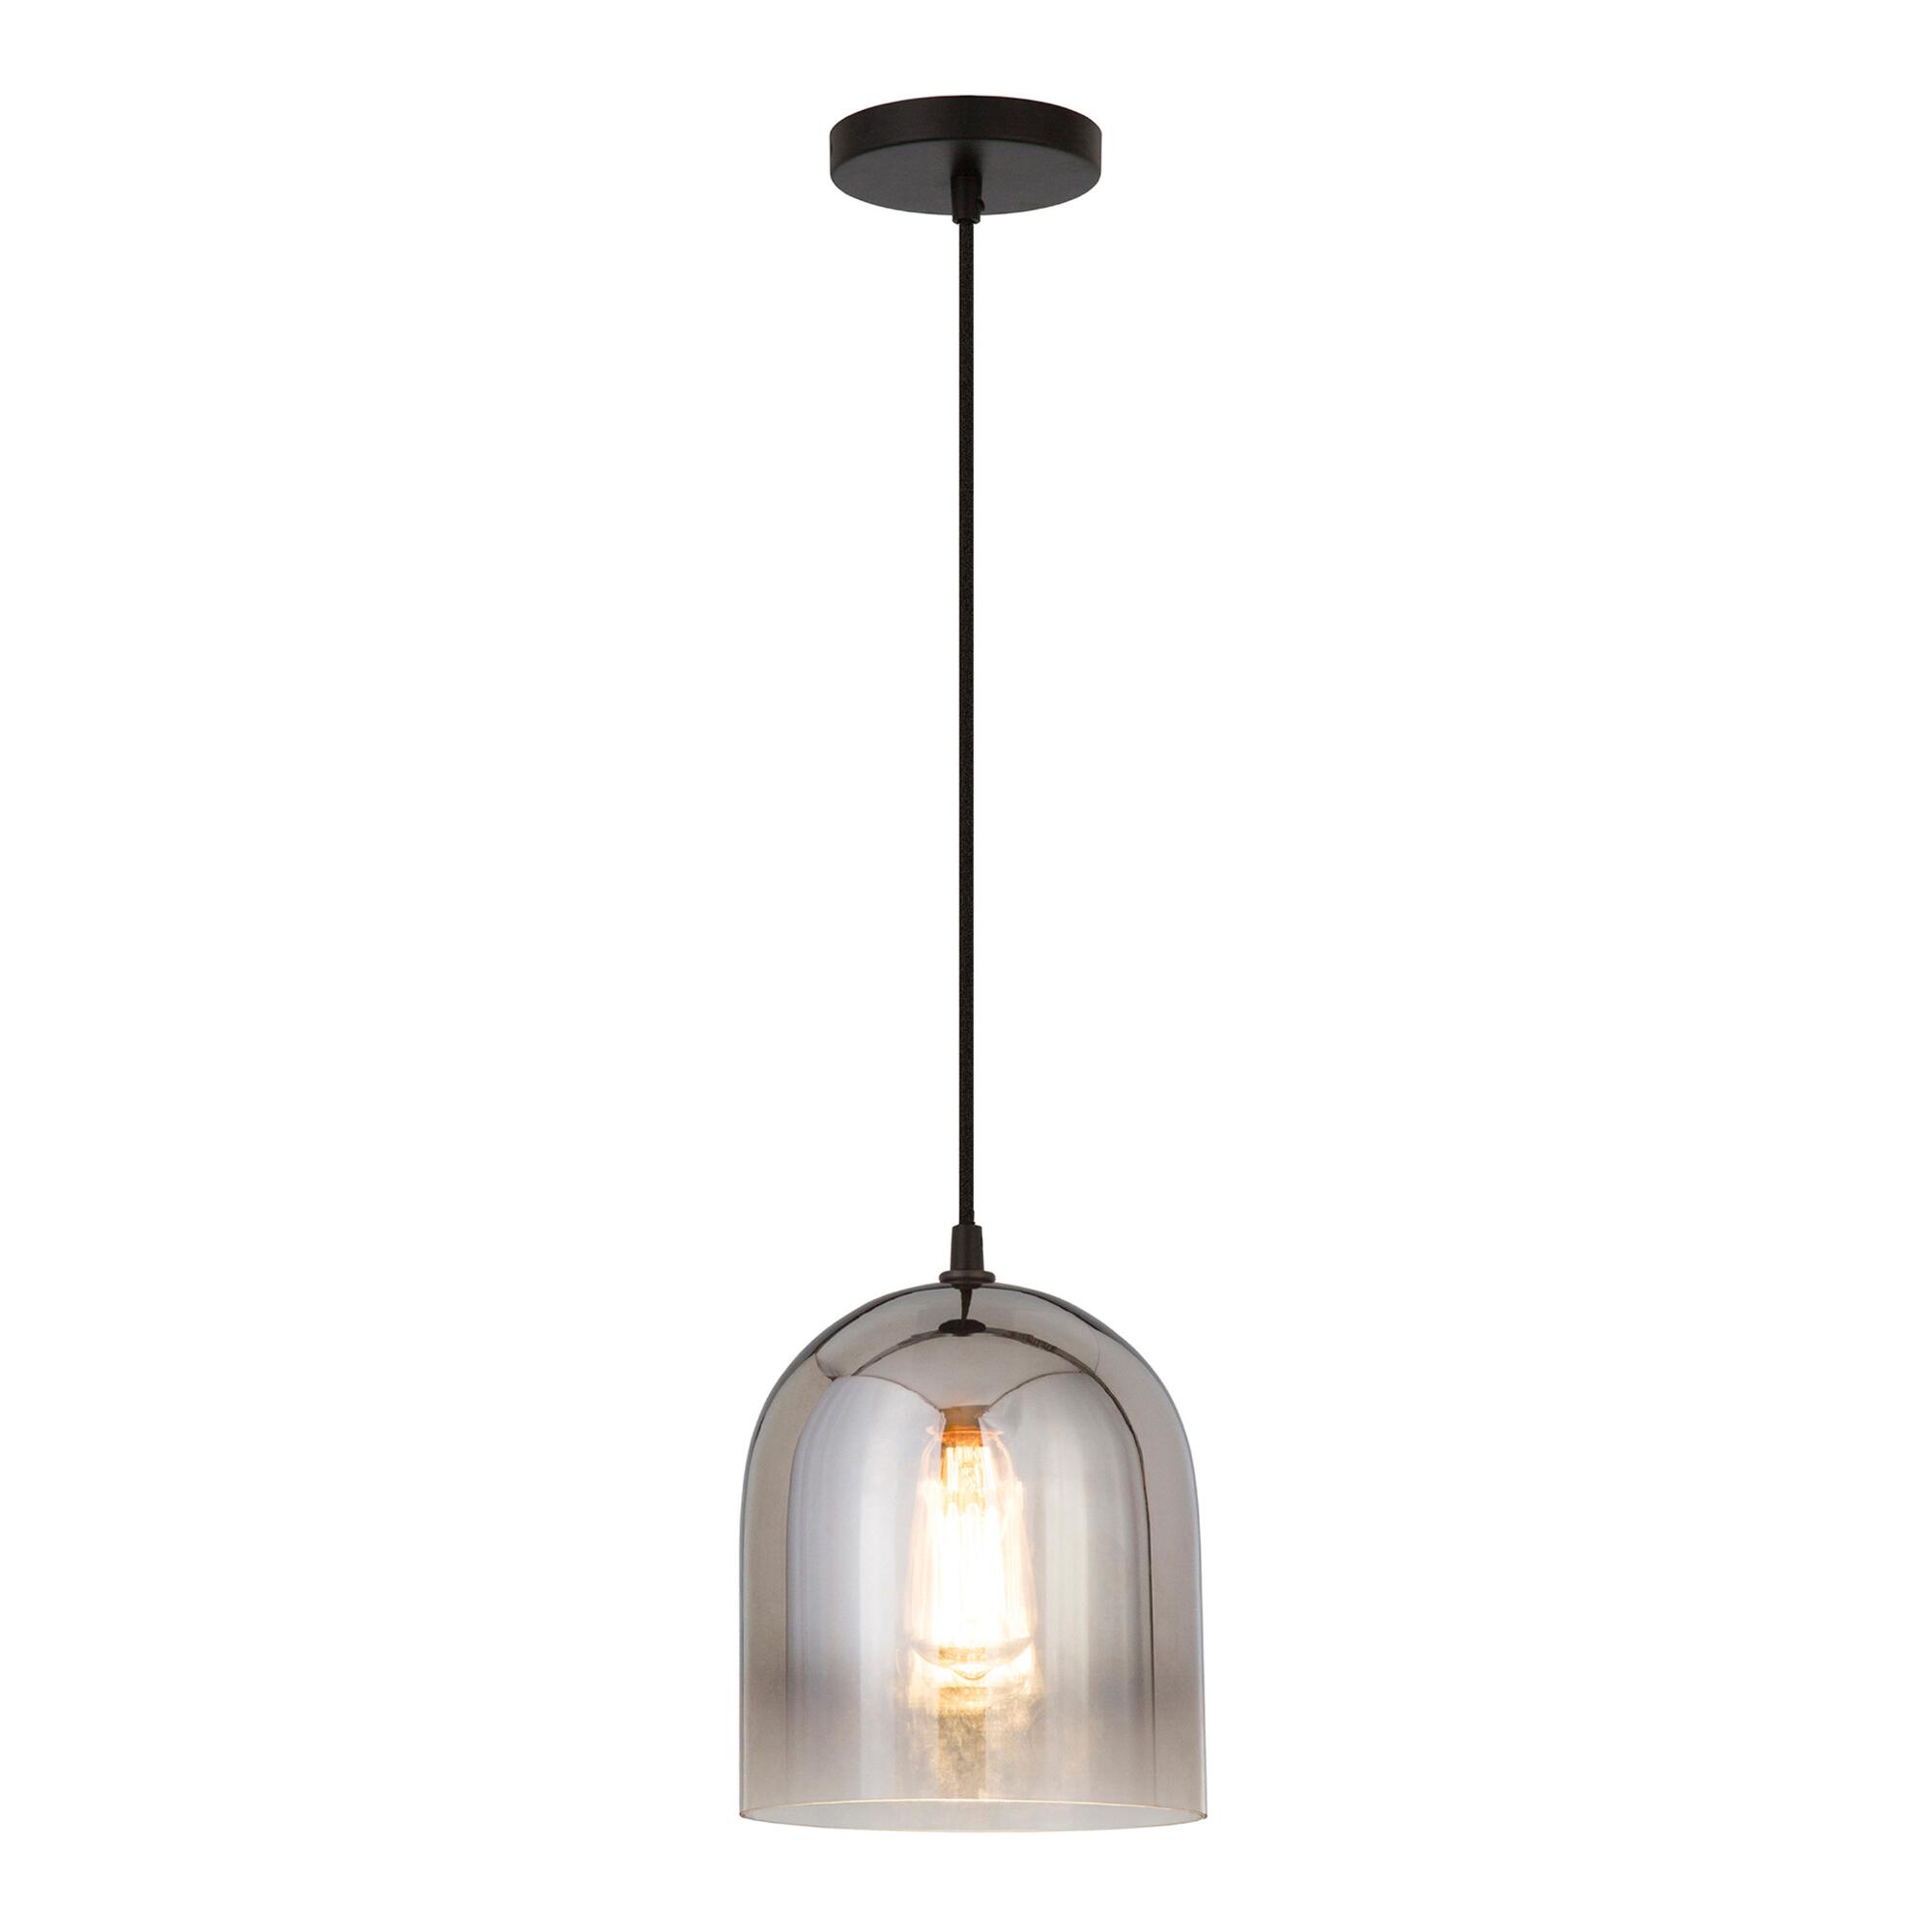 Smoked Nickel Glass Bell and Metal Asen Pendant Lamp: Silver by World Market